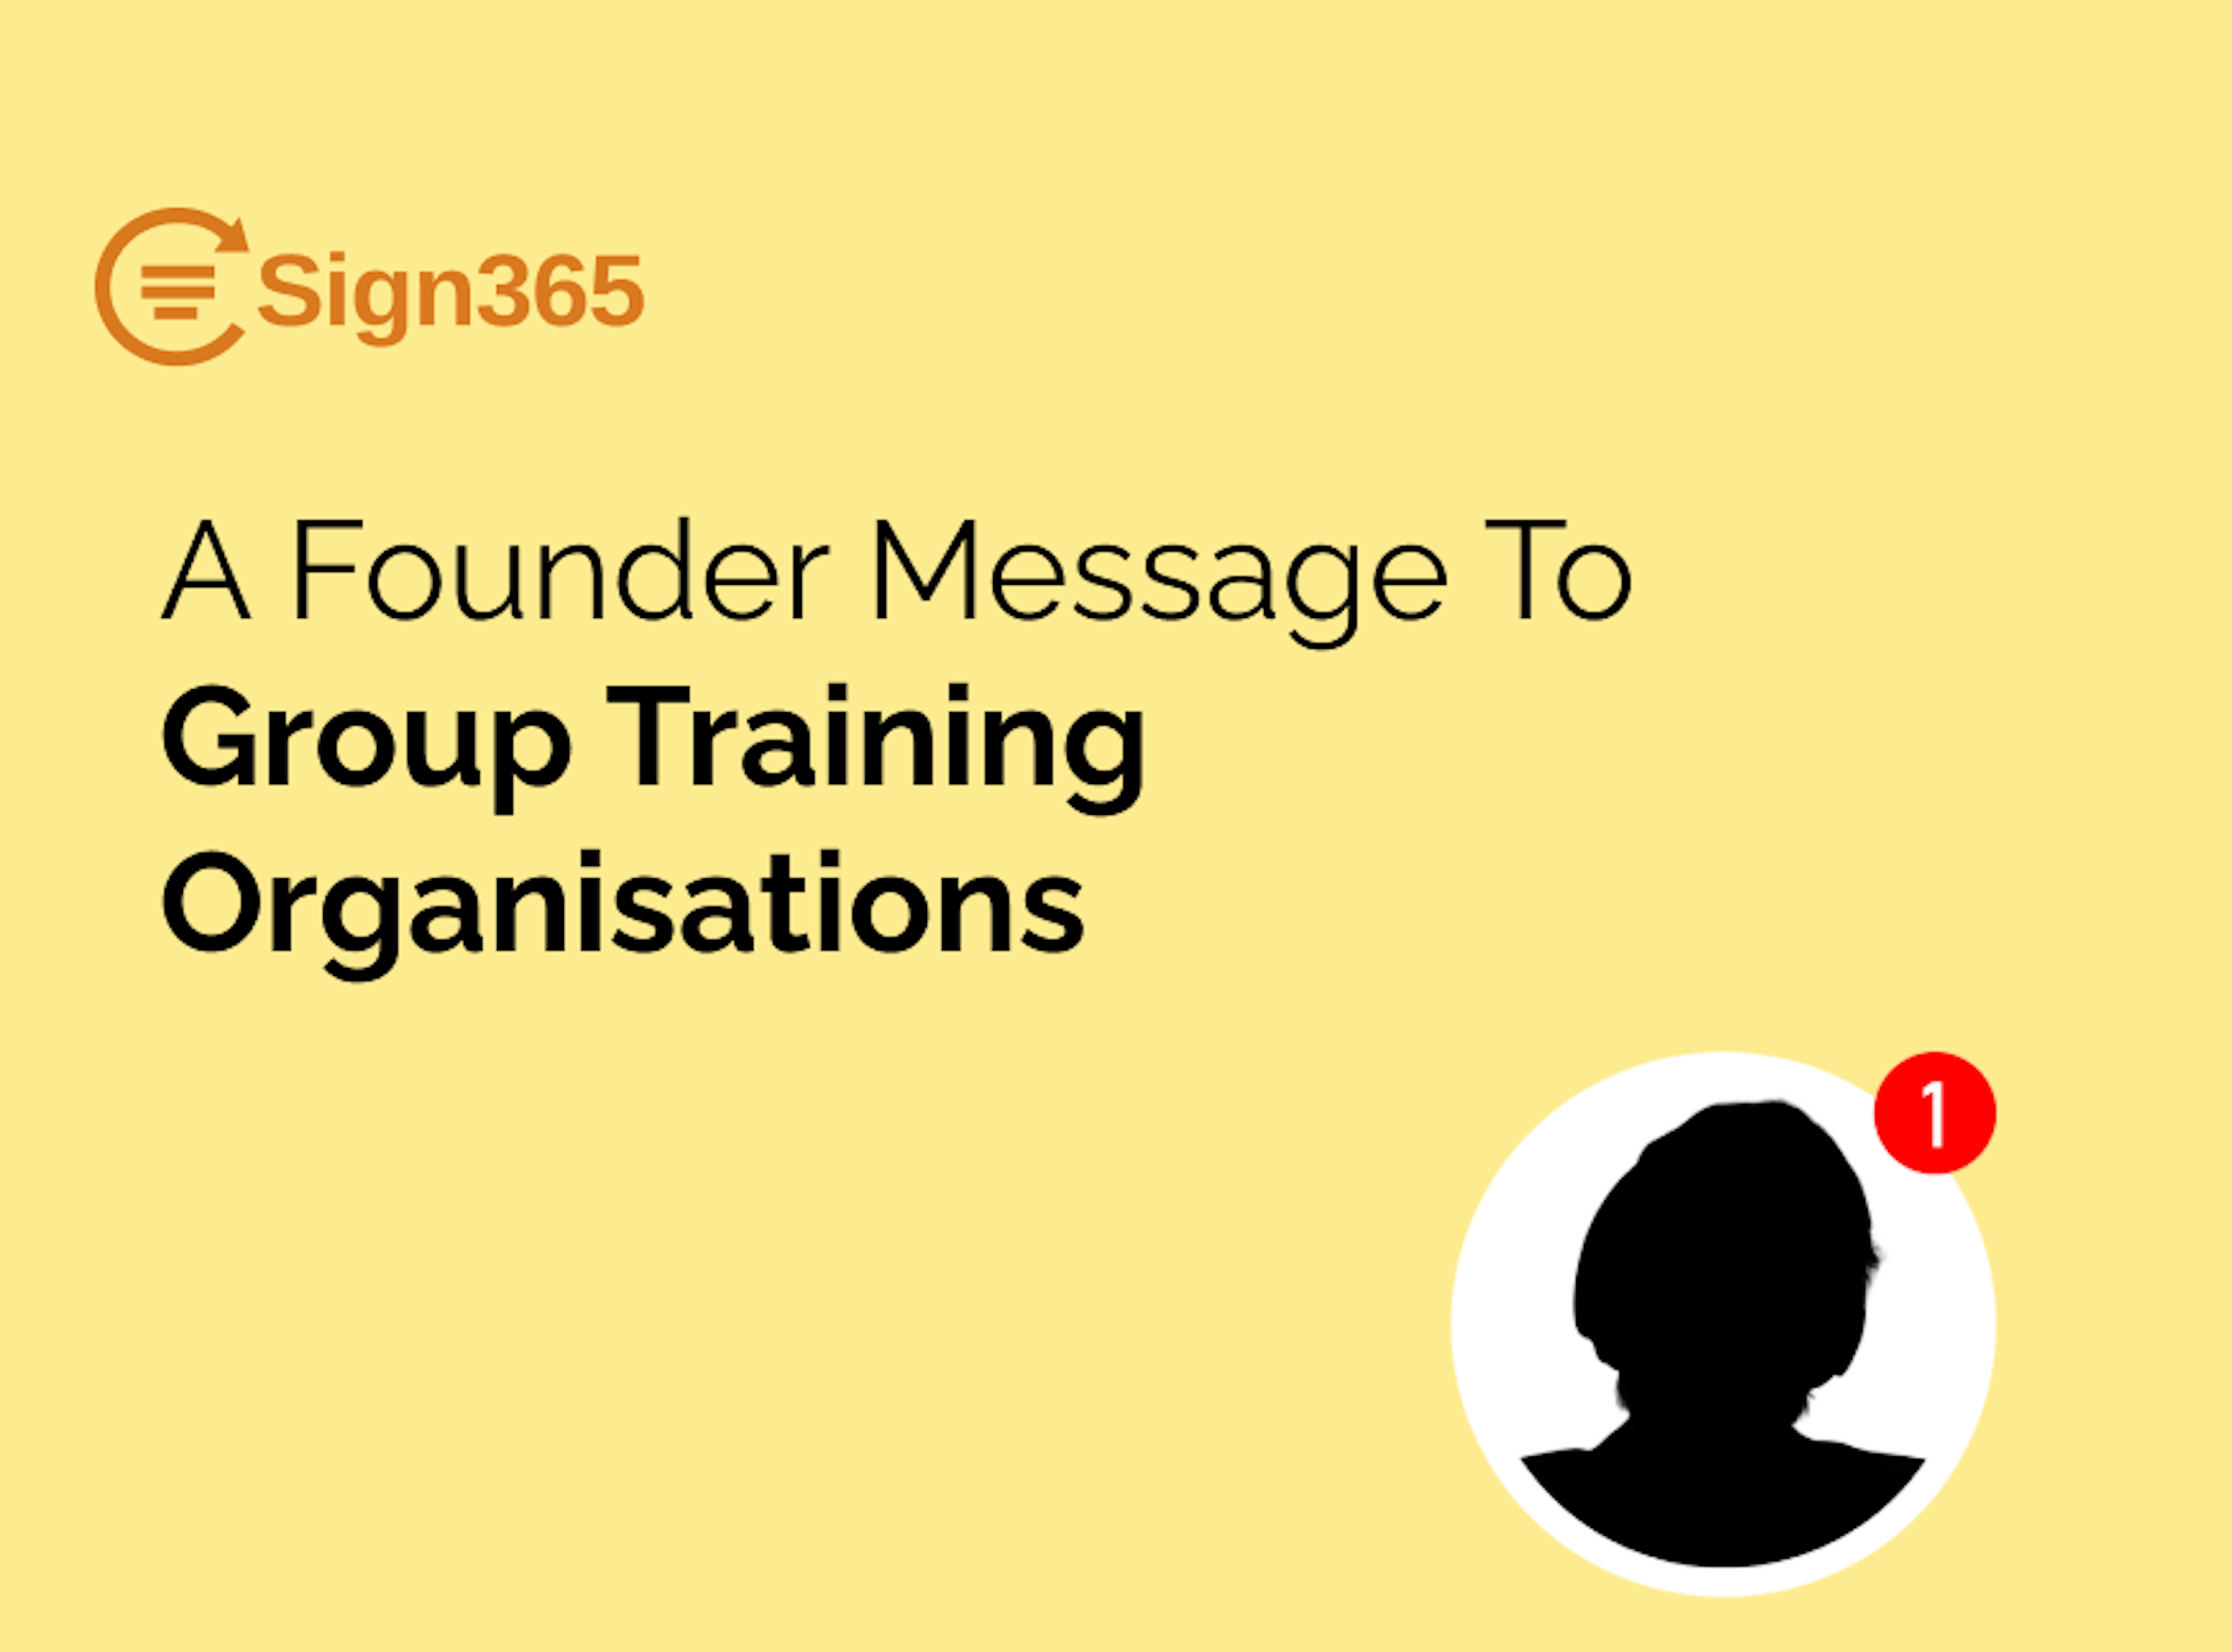 A Founder Message To Group Training Organisations